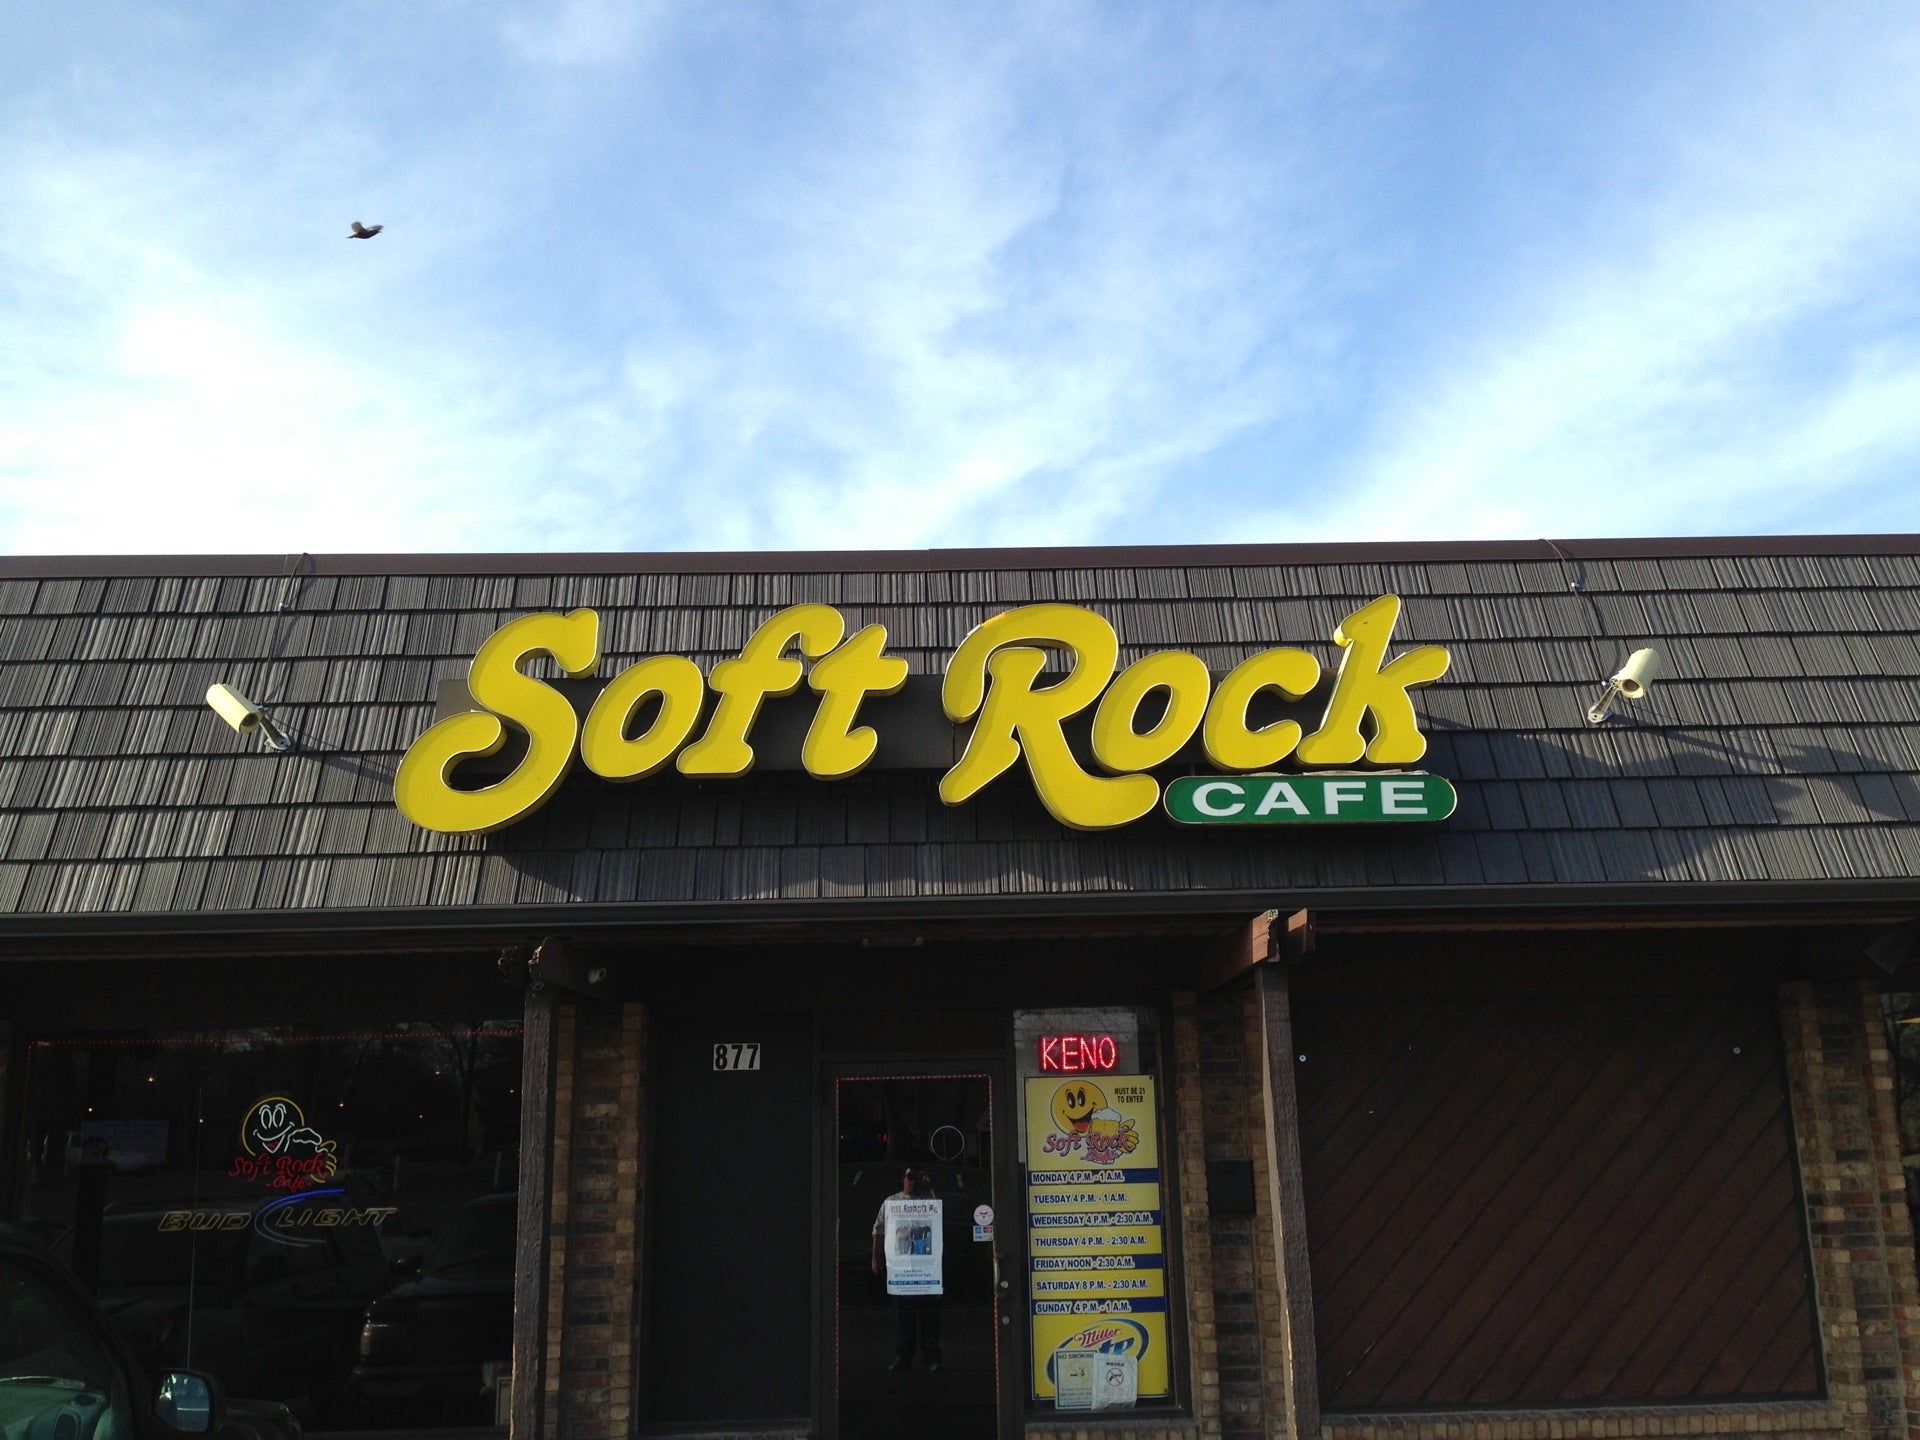 SOFT ROCK CAFE - 10 Reviews - 877 E Franklin St, Centerville, Ohio - Bars -  Restaurant Reviews - Phone Number - Yelp